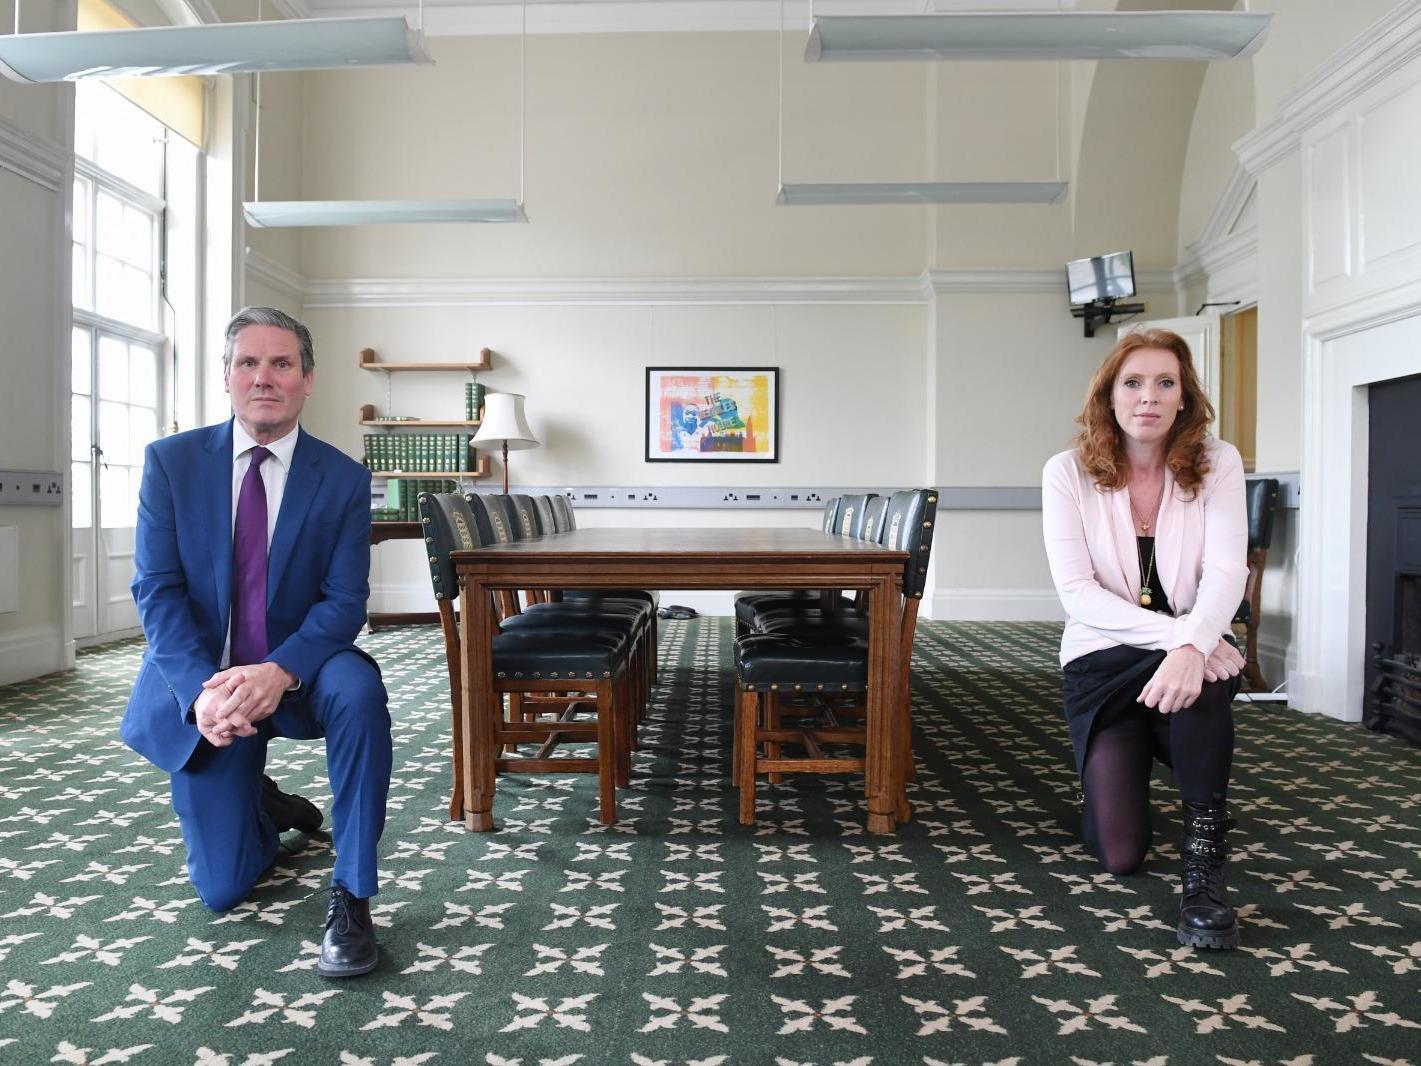 Labour’s Sir Keir Starmer and deputy leader Angela Rayner adopt the protest stance last week